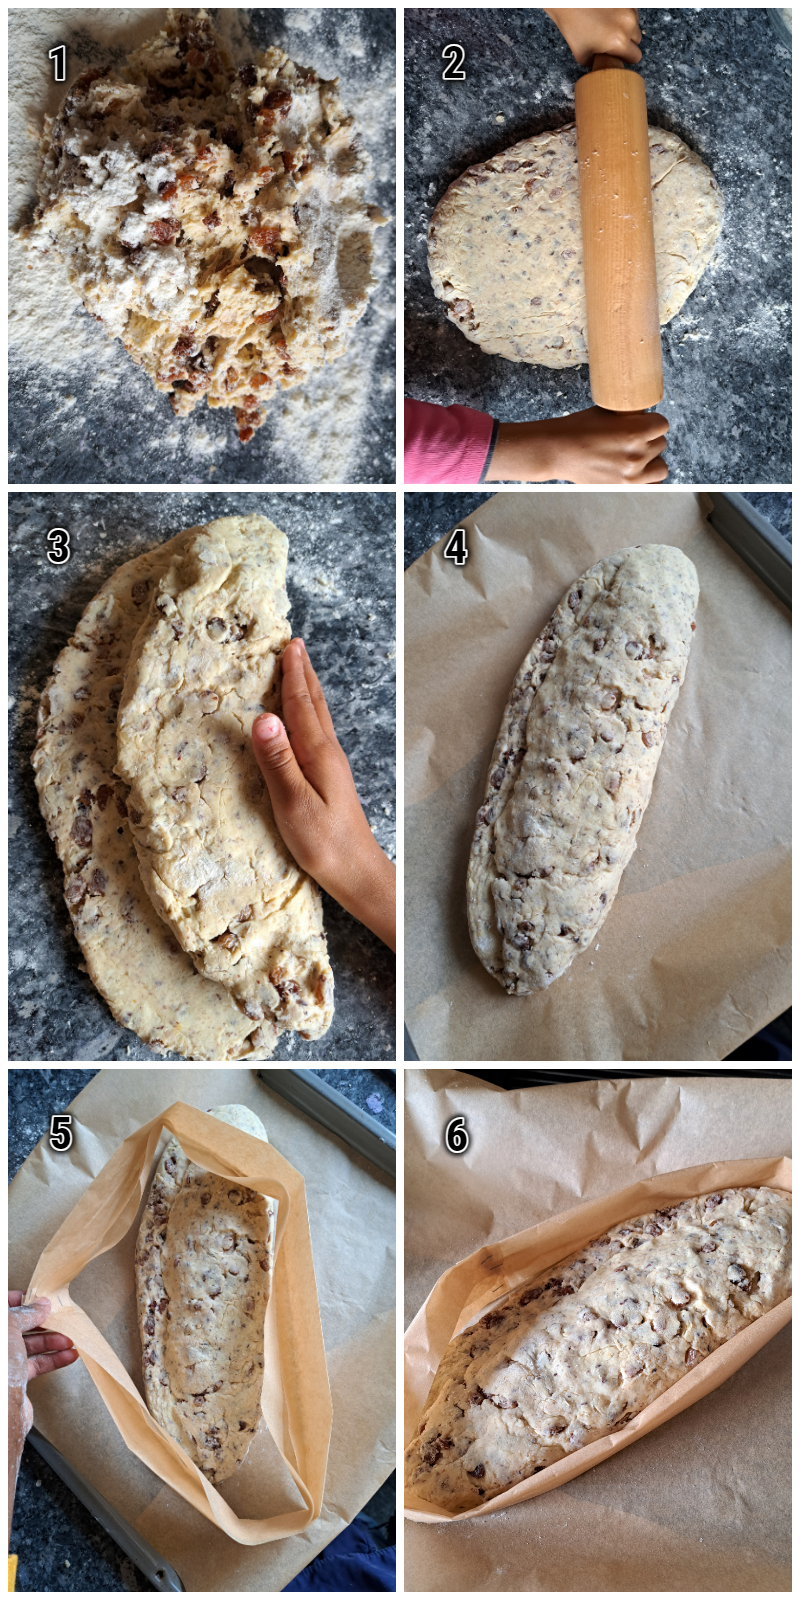 A visual guide to shaping and baking quick German sweet raisin Christmas bread. Demonstration of folding parchment paper around the Stollen for shaping, a useful technique in Stollen baking